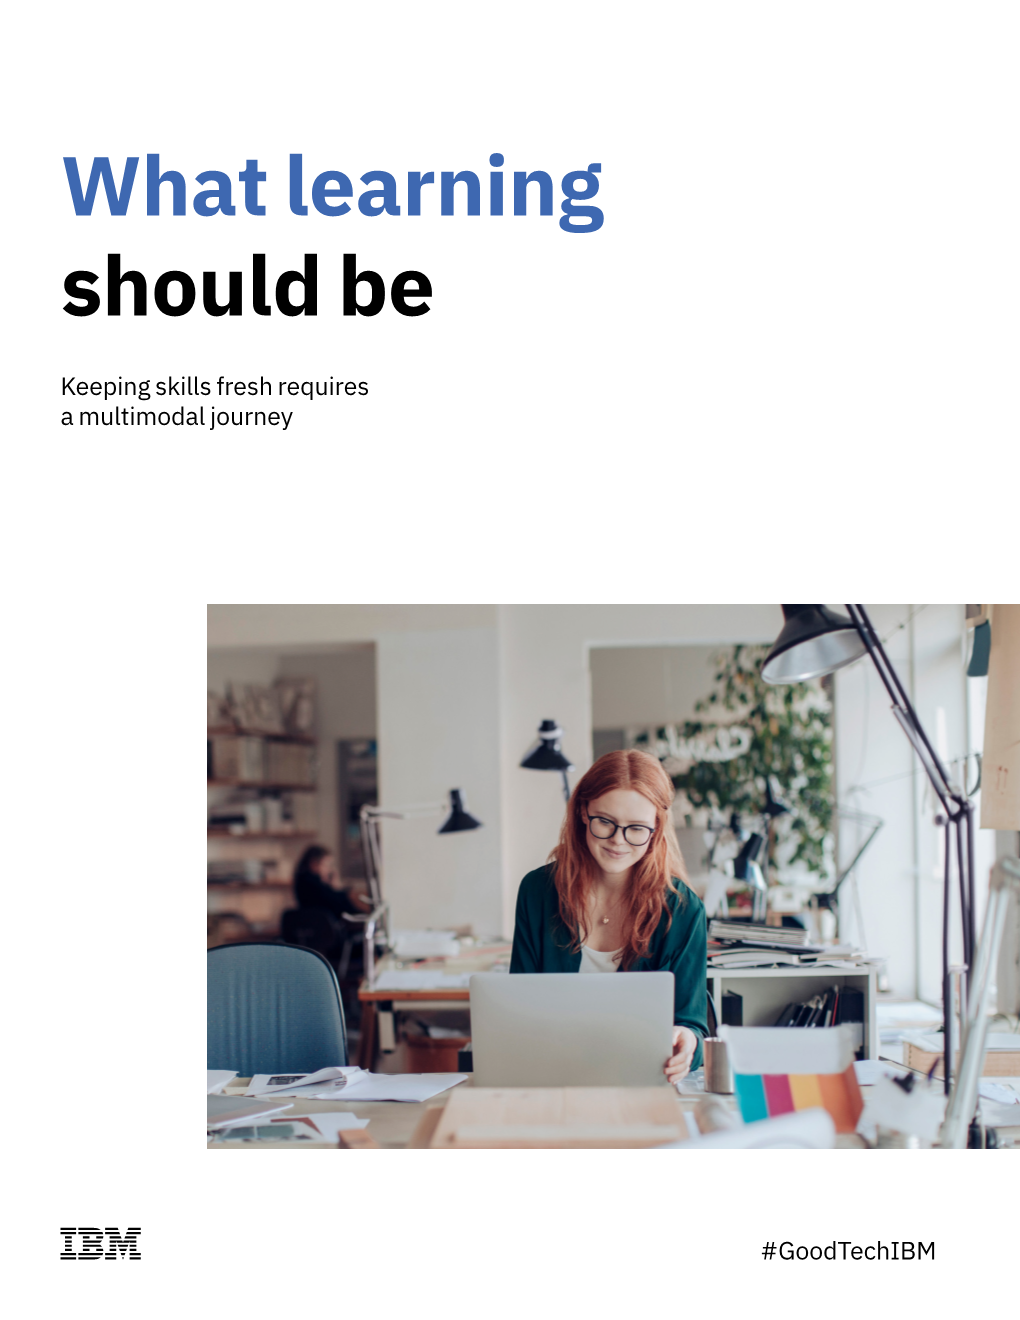 What Learning Should Be